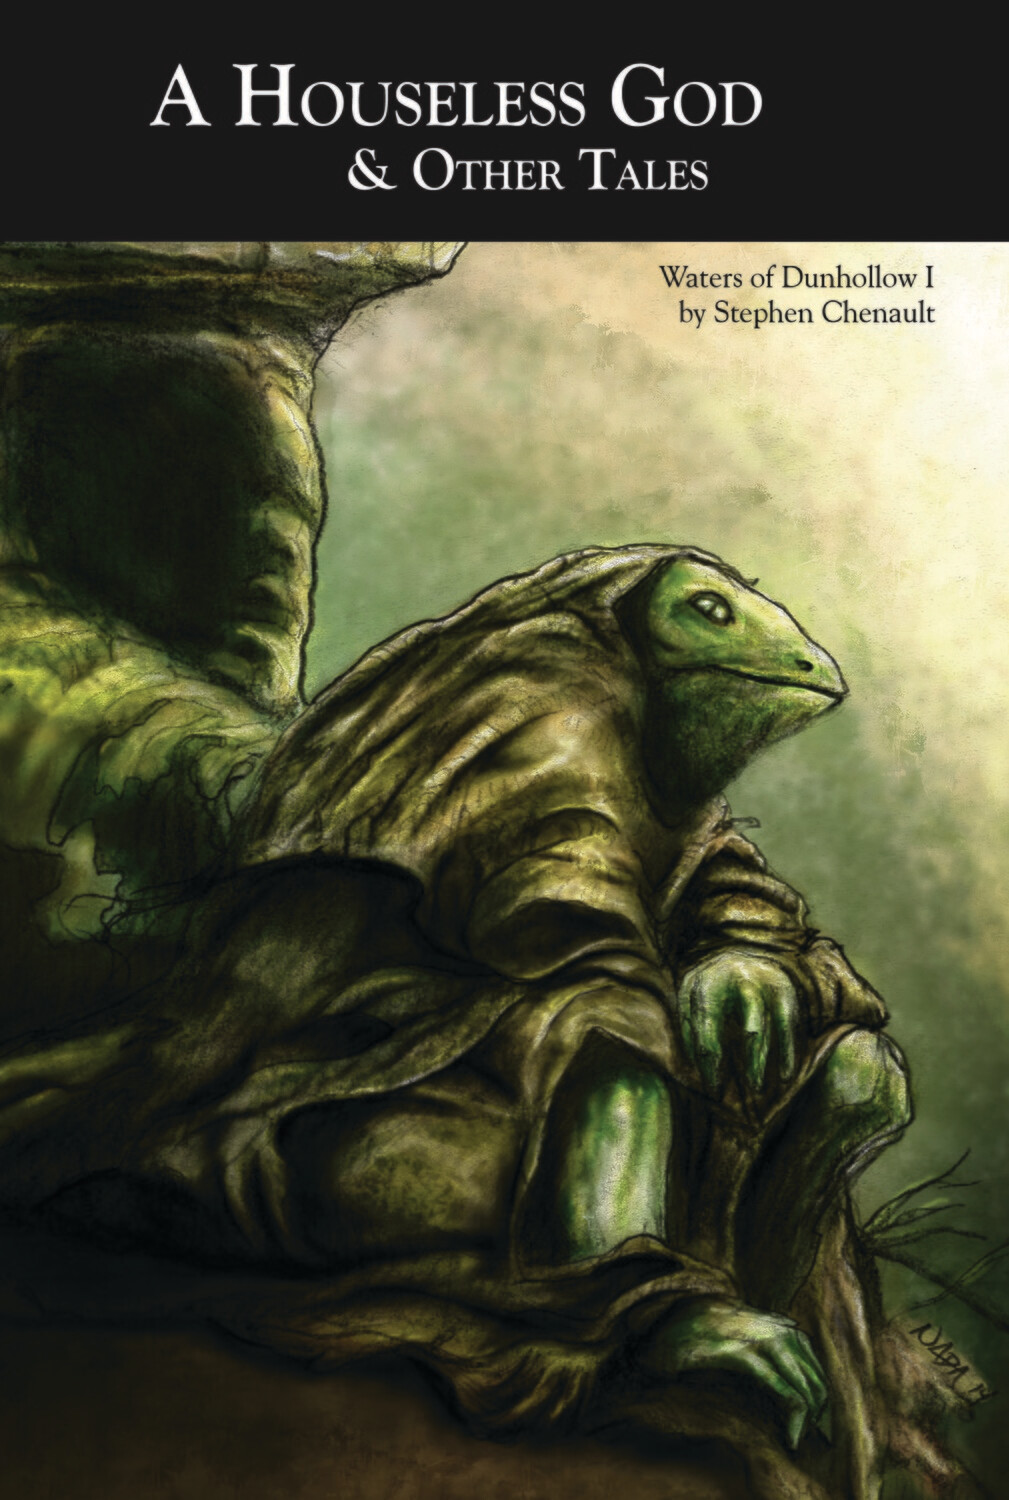 Waters of Dunhollow I: A Houseless God & Other Tales -- Print & Digital